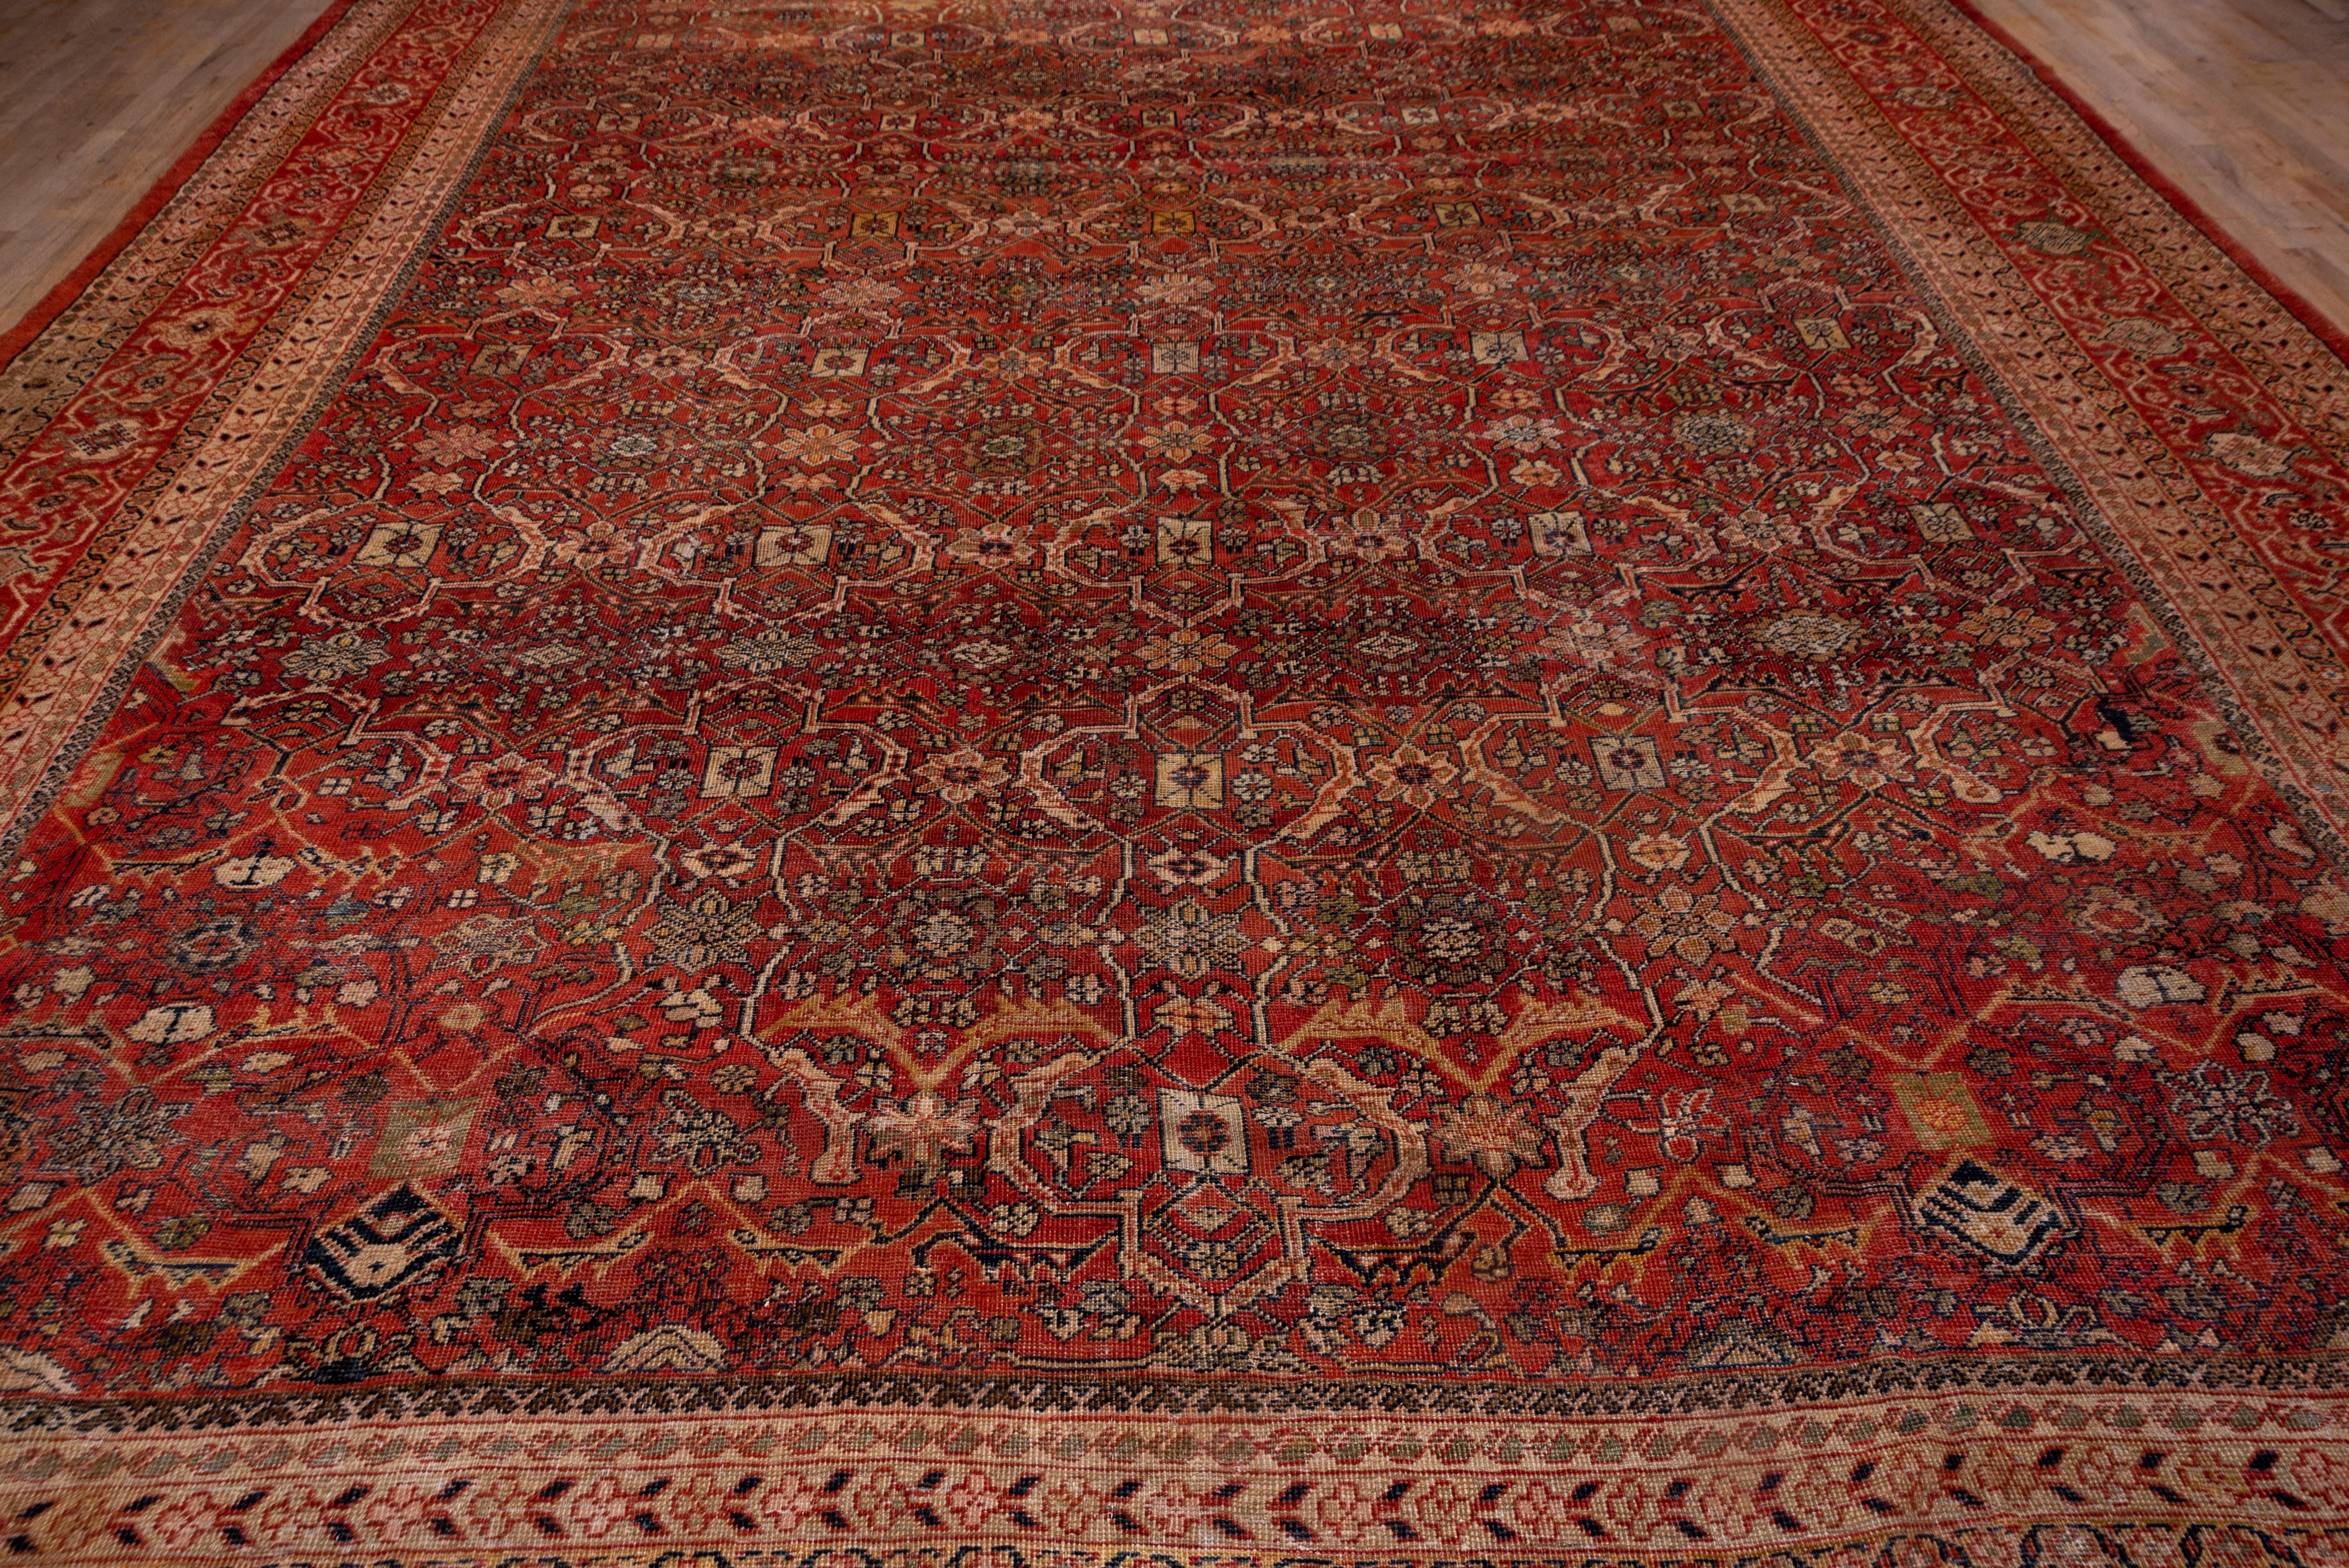 
Sultanabad rugsare a type of hand-knotted Persian rug originating from the city of Sultanabad (now known as Arak) in Iran. They are highly regarded for their quality and artistic beauty. Sultanabad rugs gained popularity during the late 19th and